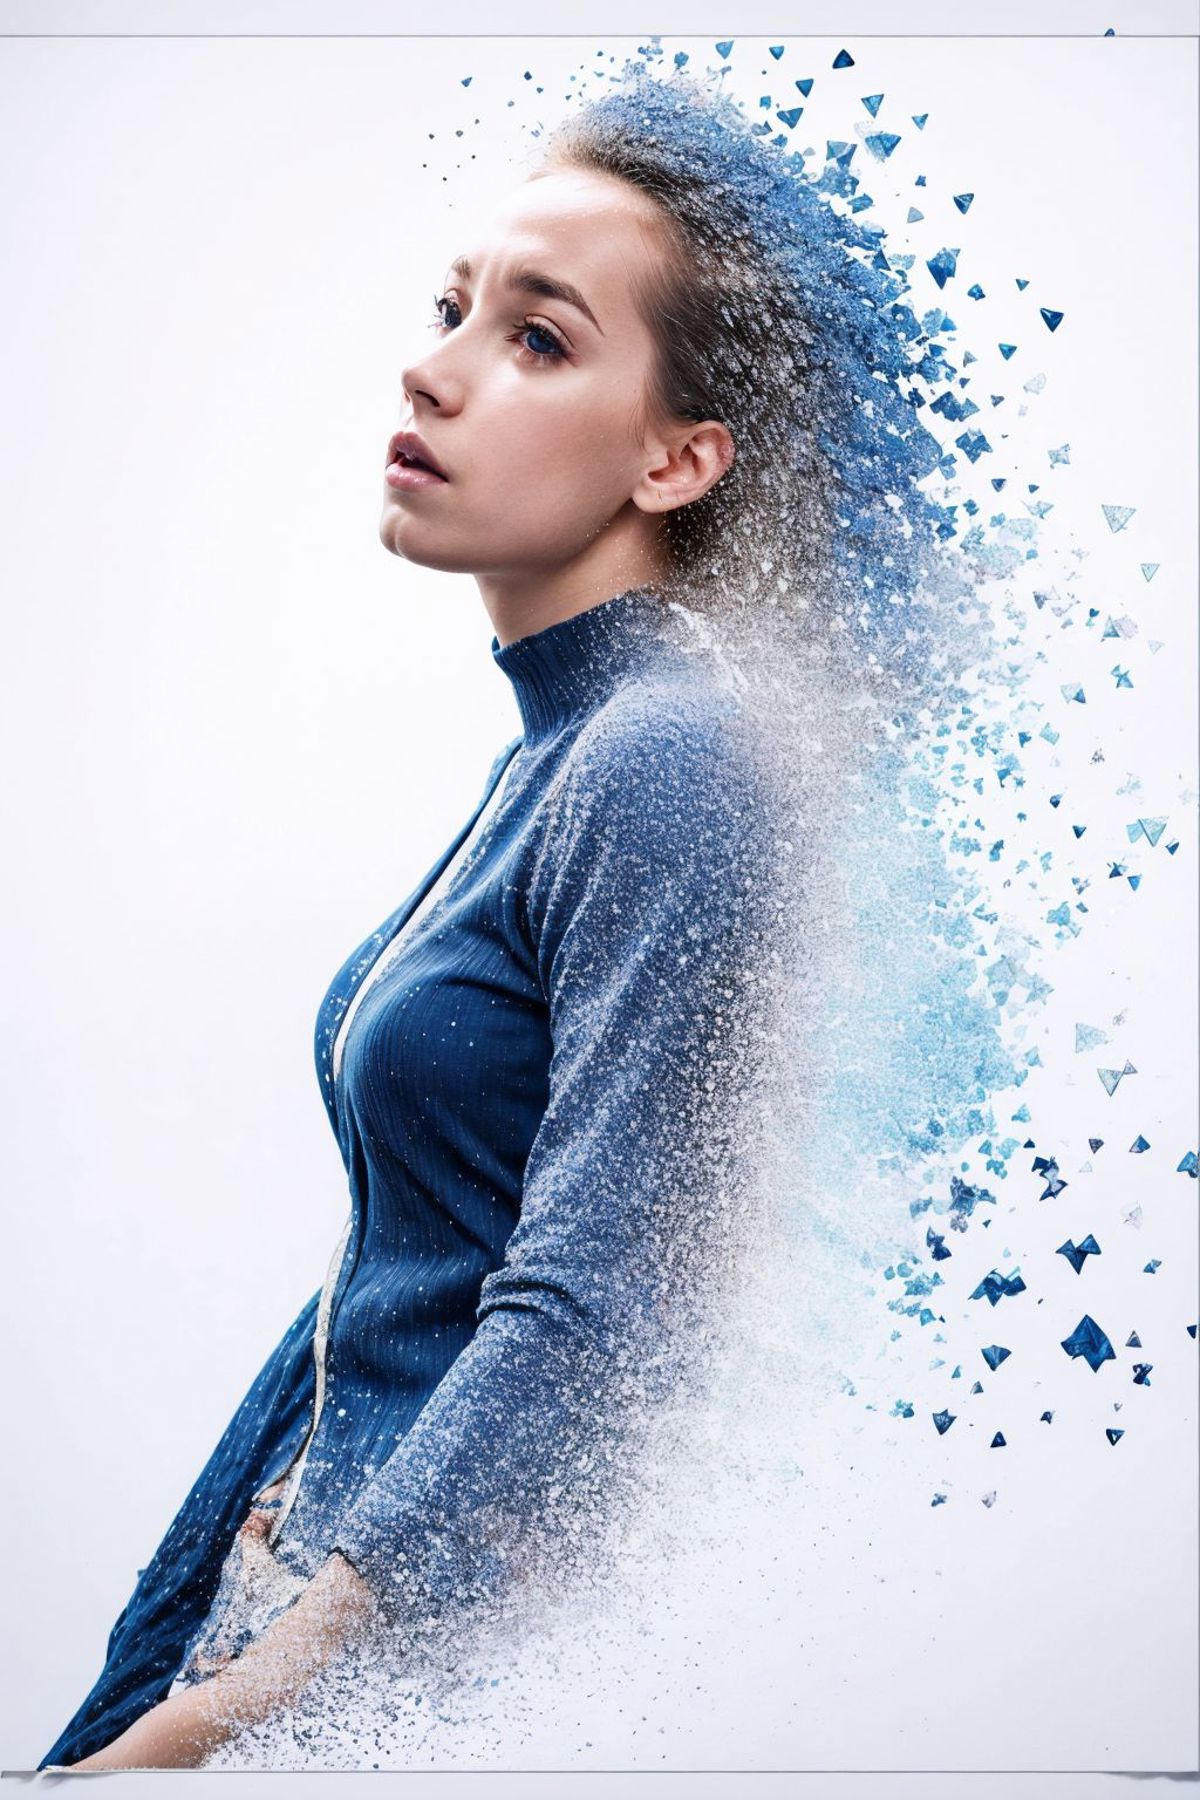 Disintegration Effect (I dont feel so good) | Concept LoRA image by Fusch